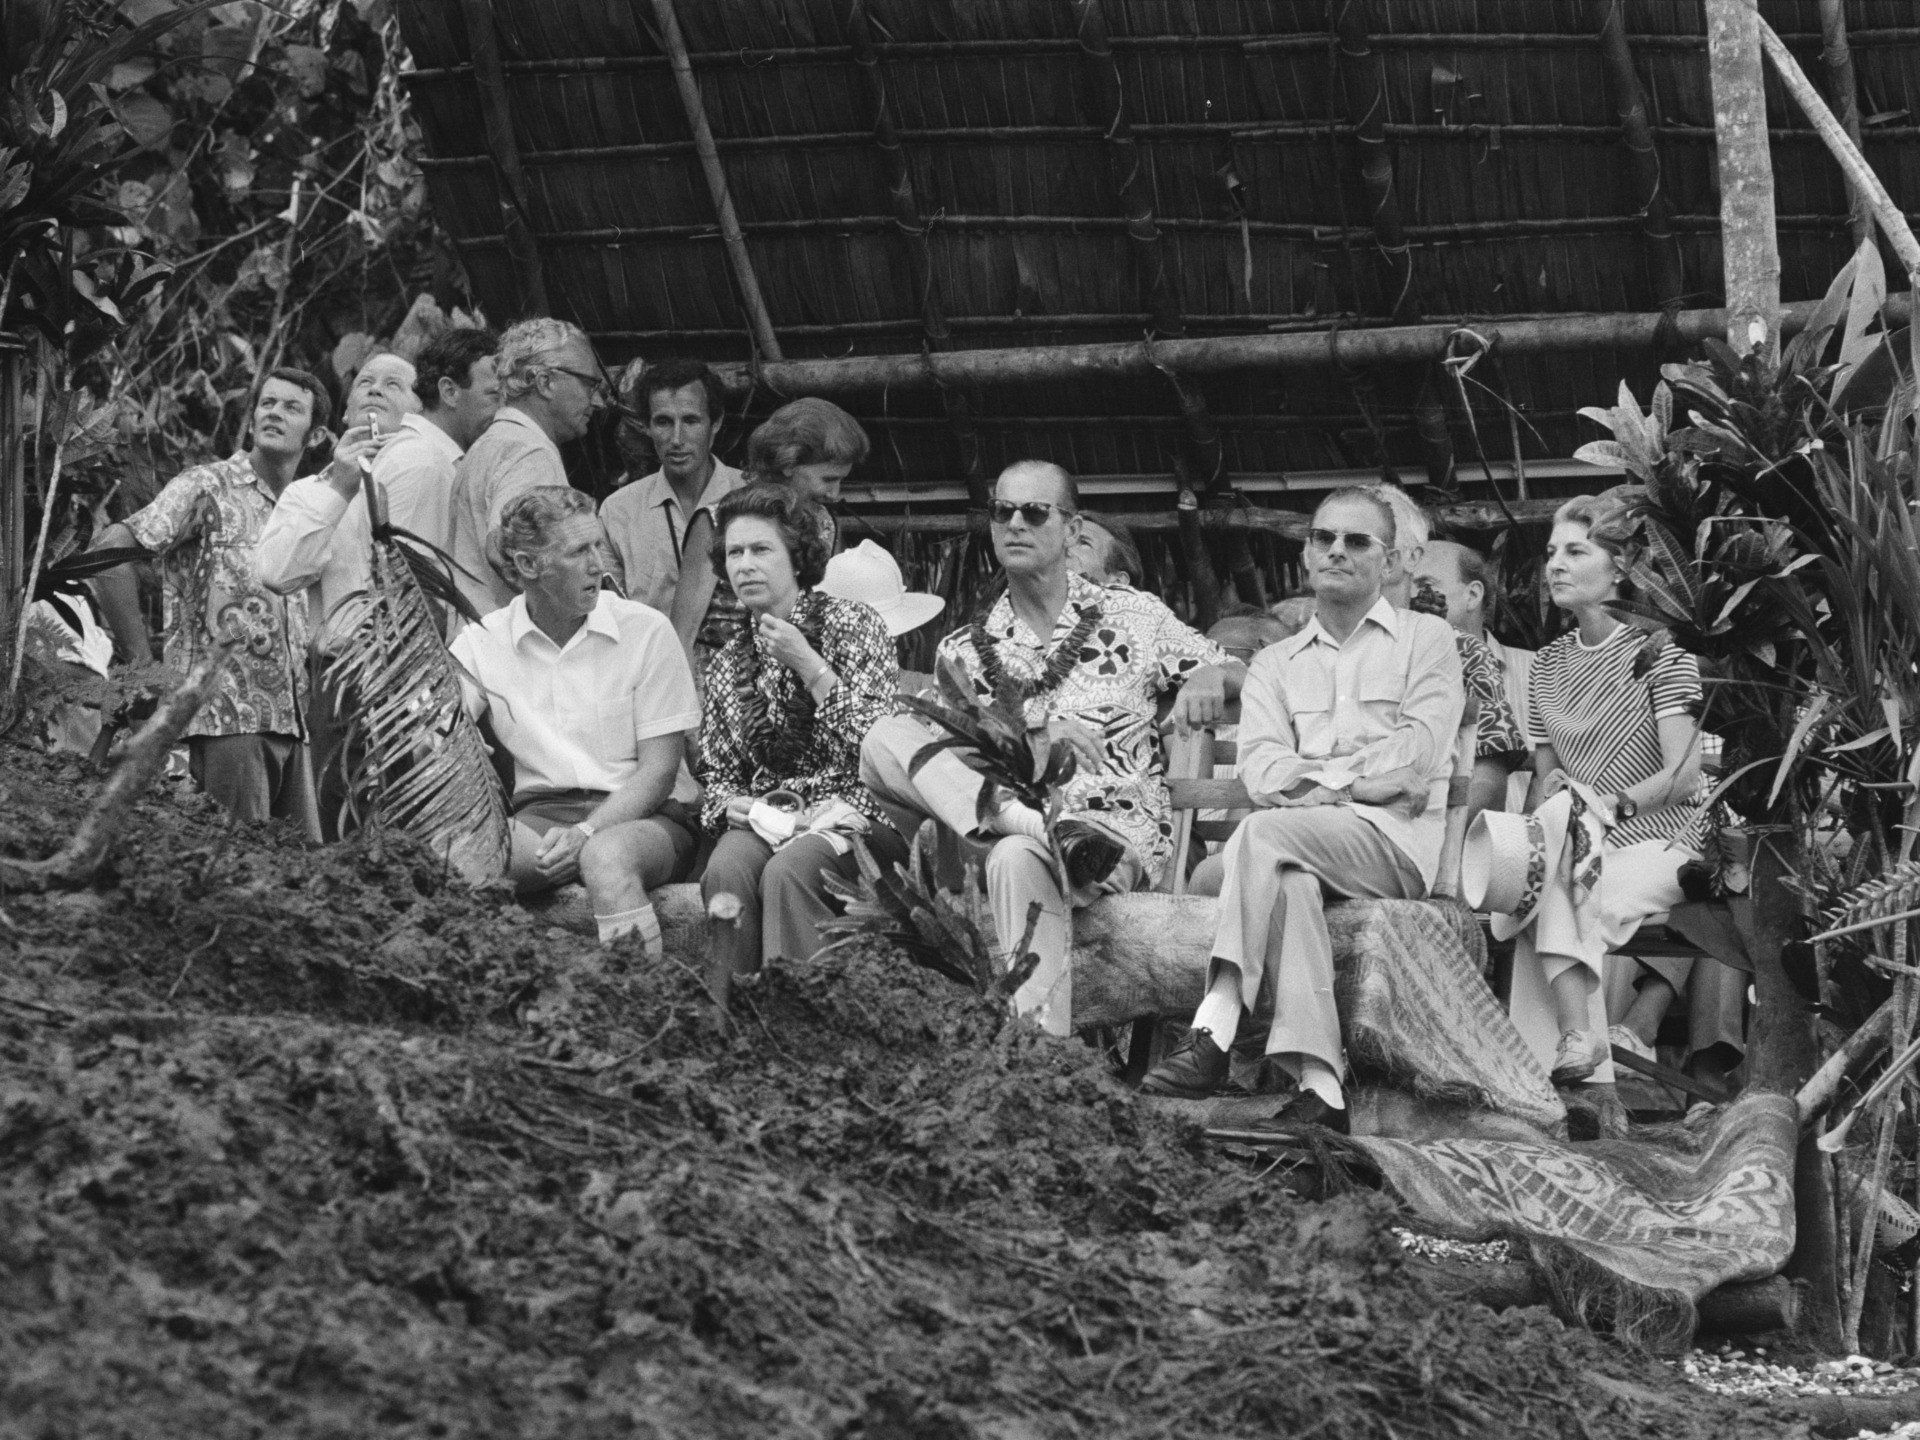 Queen Elizabeth and Prince Philip (centre) watching a display of land-diving from a bamboo tower, during their visit to Pentecost Island, Vanuatu, off the north-east coast of Australia, February 1974. Land diving is an initiation rite unique to the island, and is thought to be the origin of bungee jumping. (Photo by McCabe/Daily Express/Hulton Archive/Getty Images)